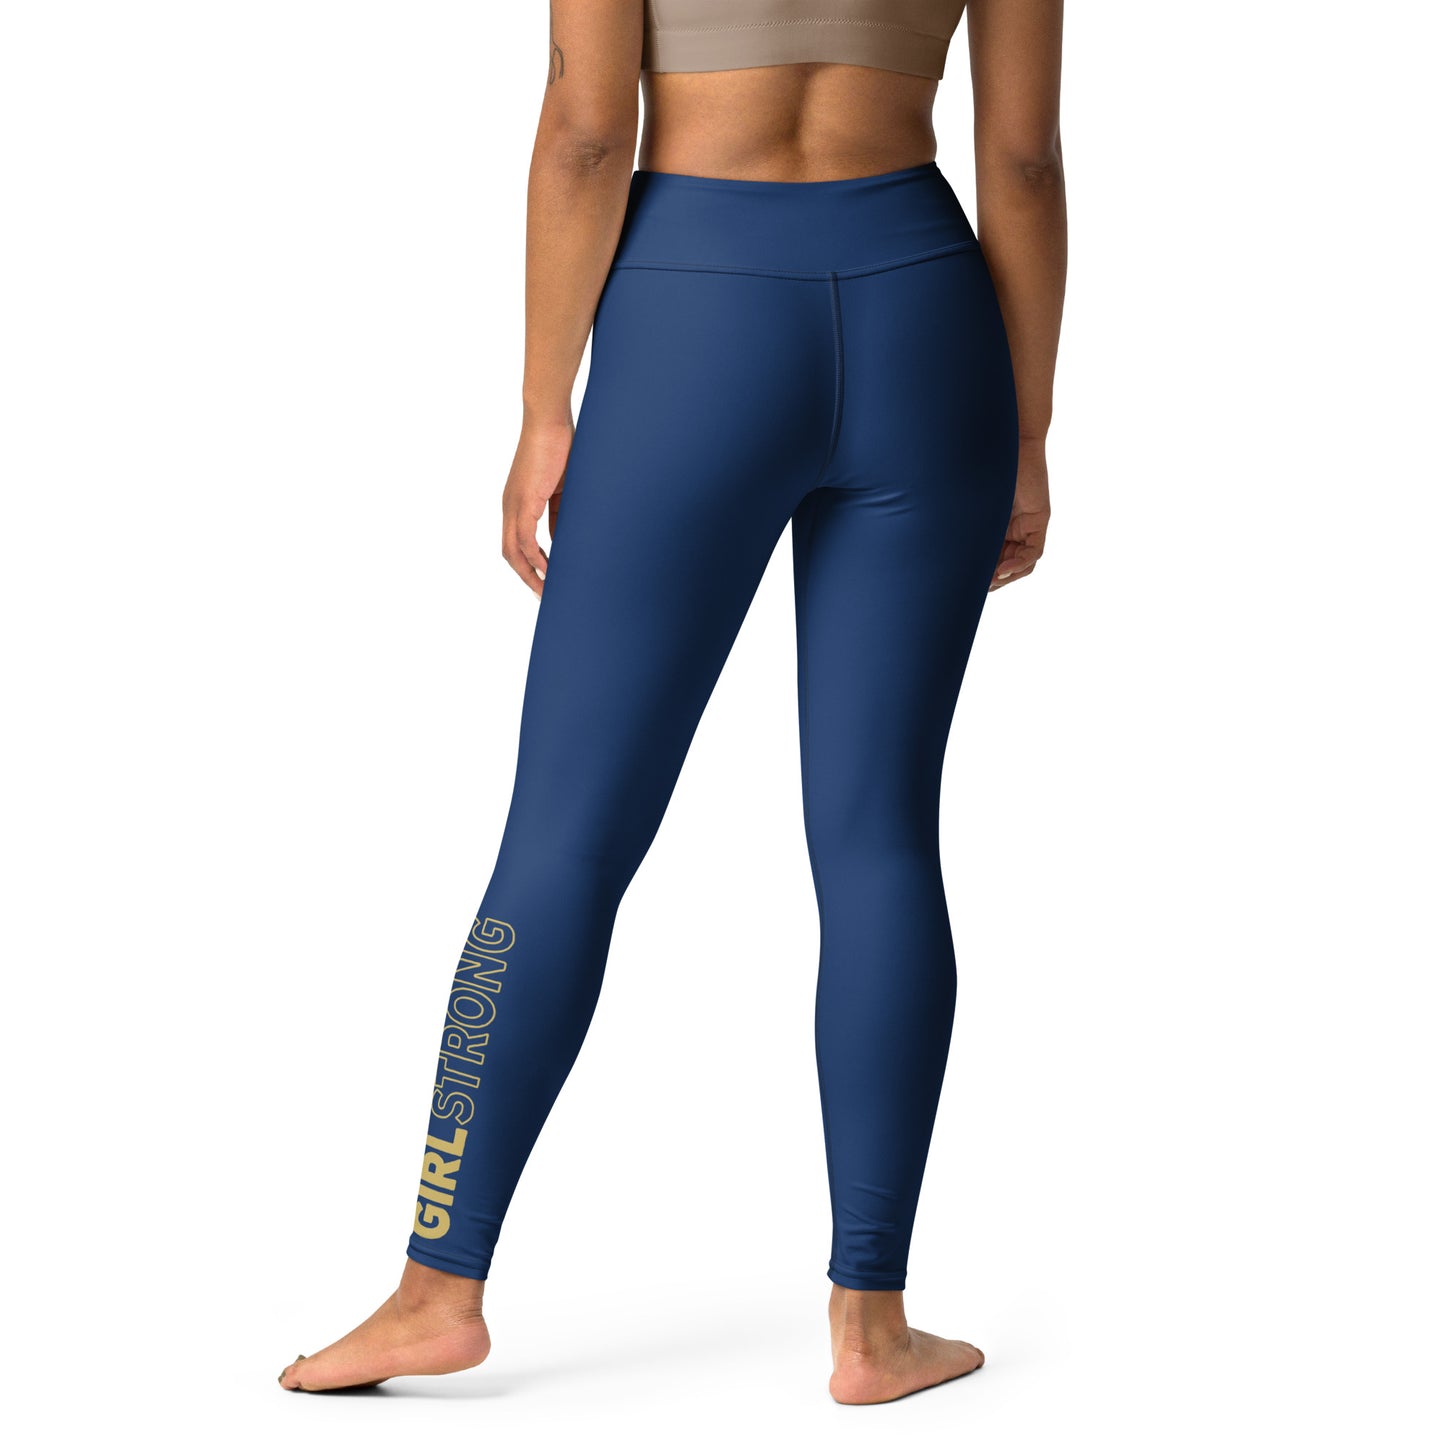 ELEVATED ESSENTIALS, THE PERFECT HIGH WAISTBAND LEGGING NOTRE DAME